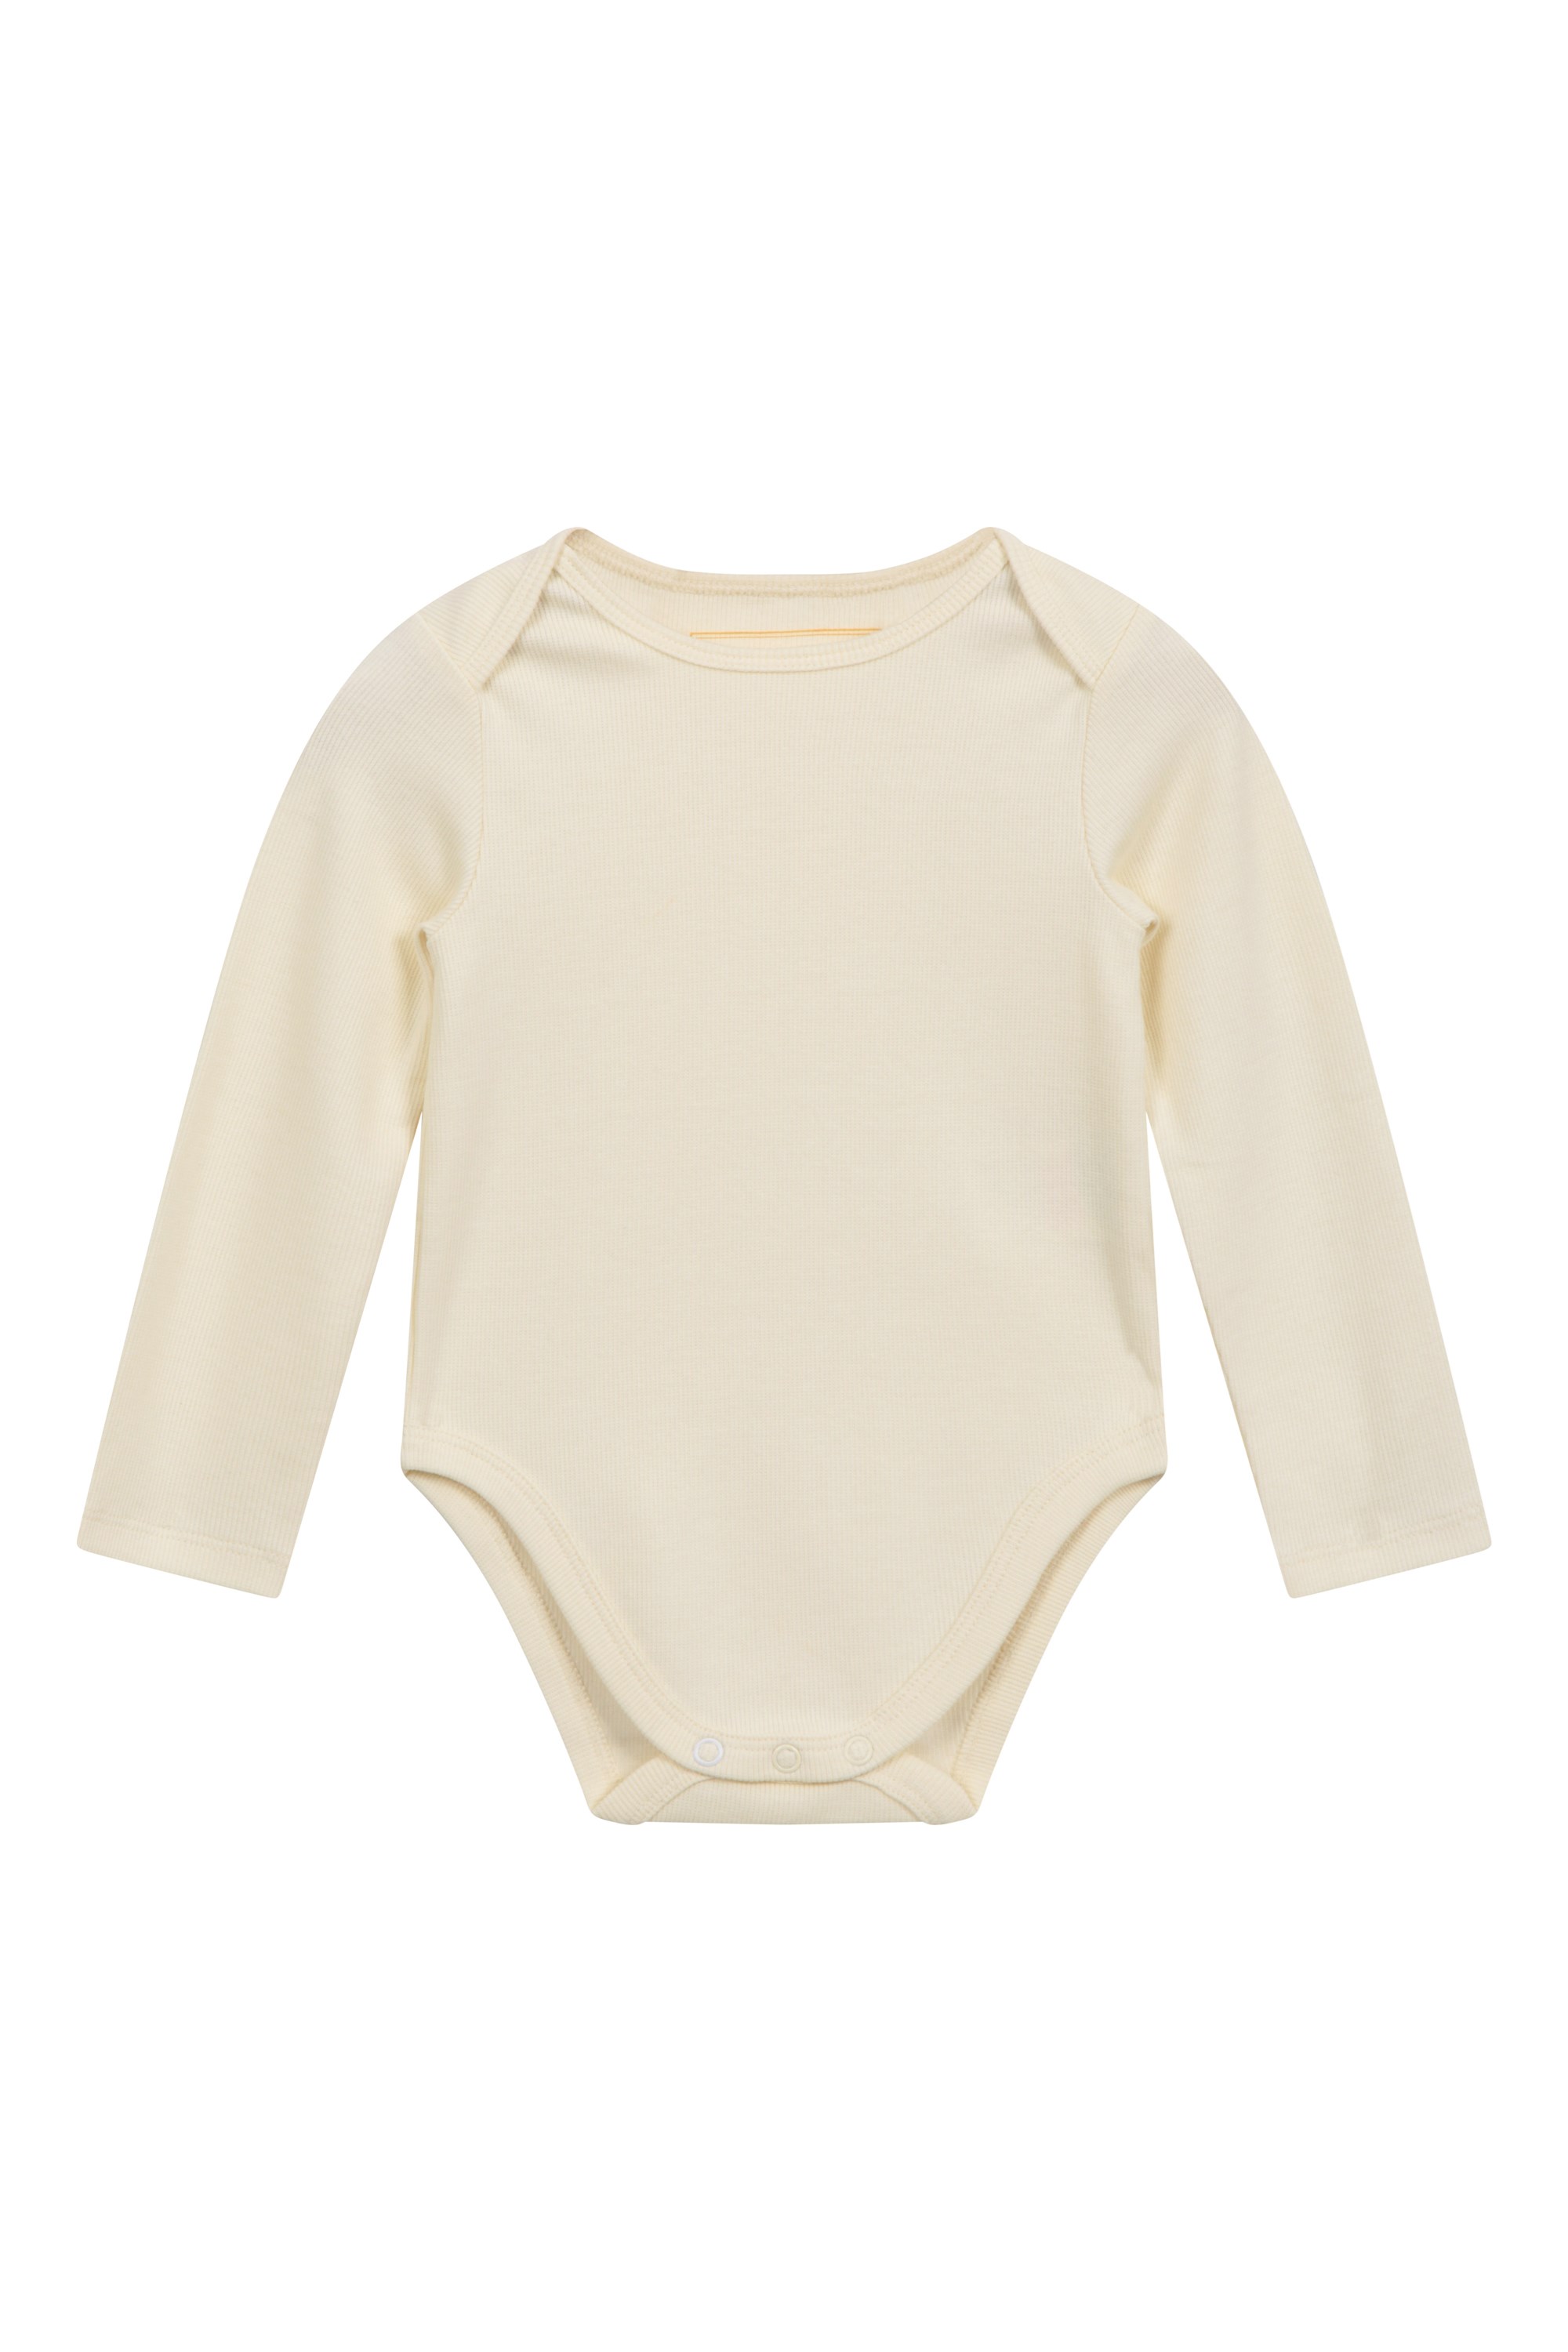 Petit Bateau Baby Set of Two Ribbed LS Cross Over Bodysuits Beige